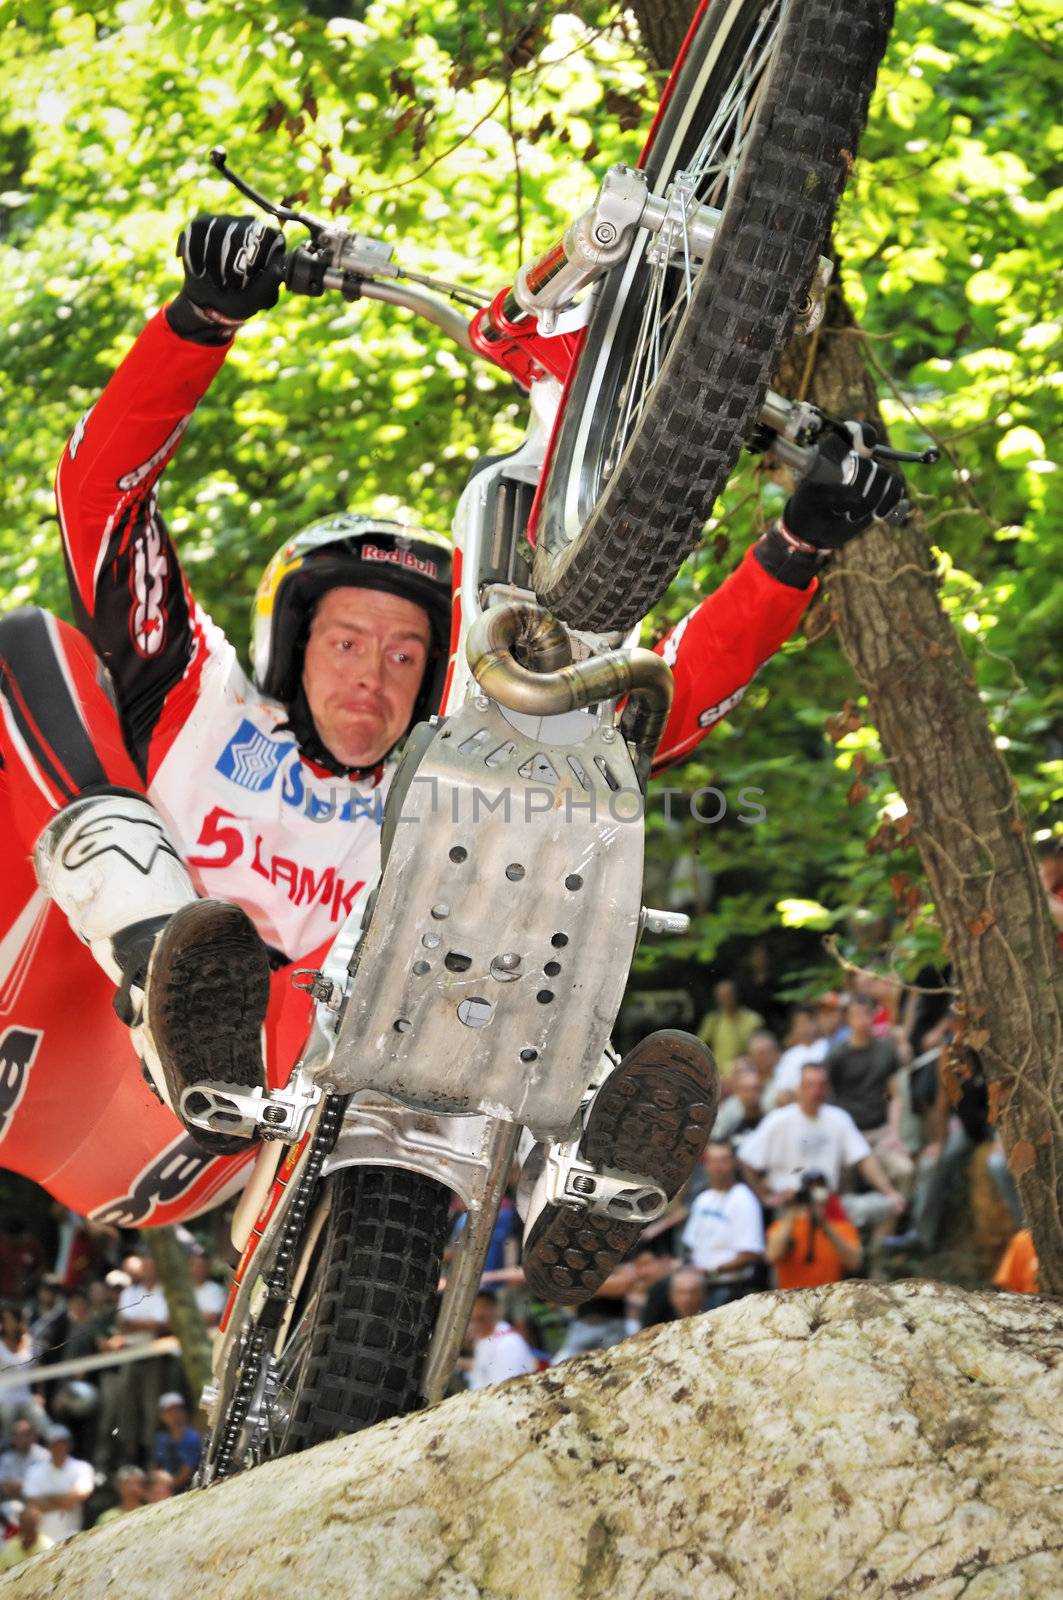 Dougie Lampkin - 12 times trial world champion - in actrion